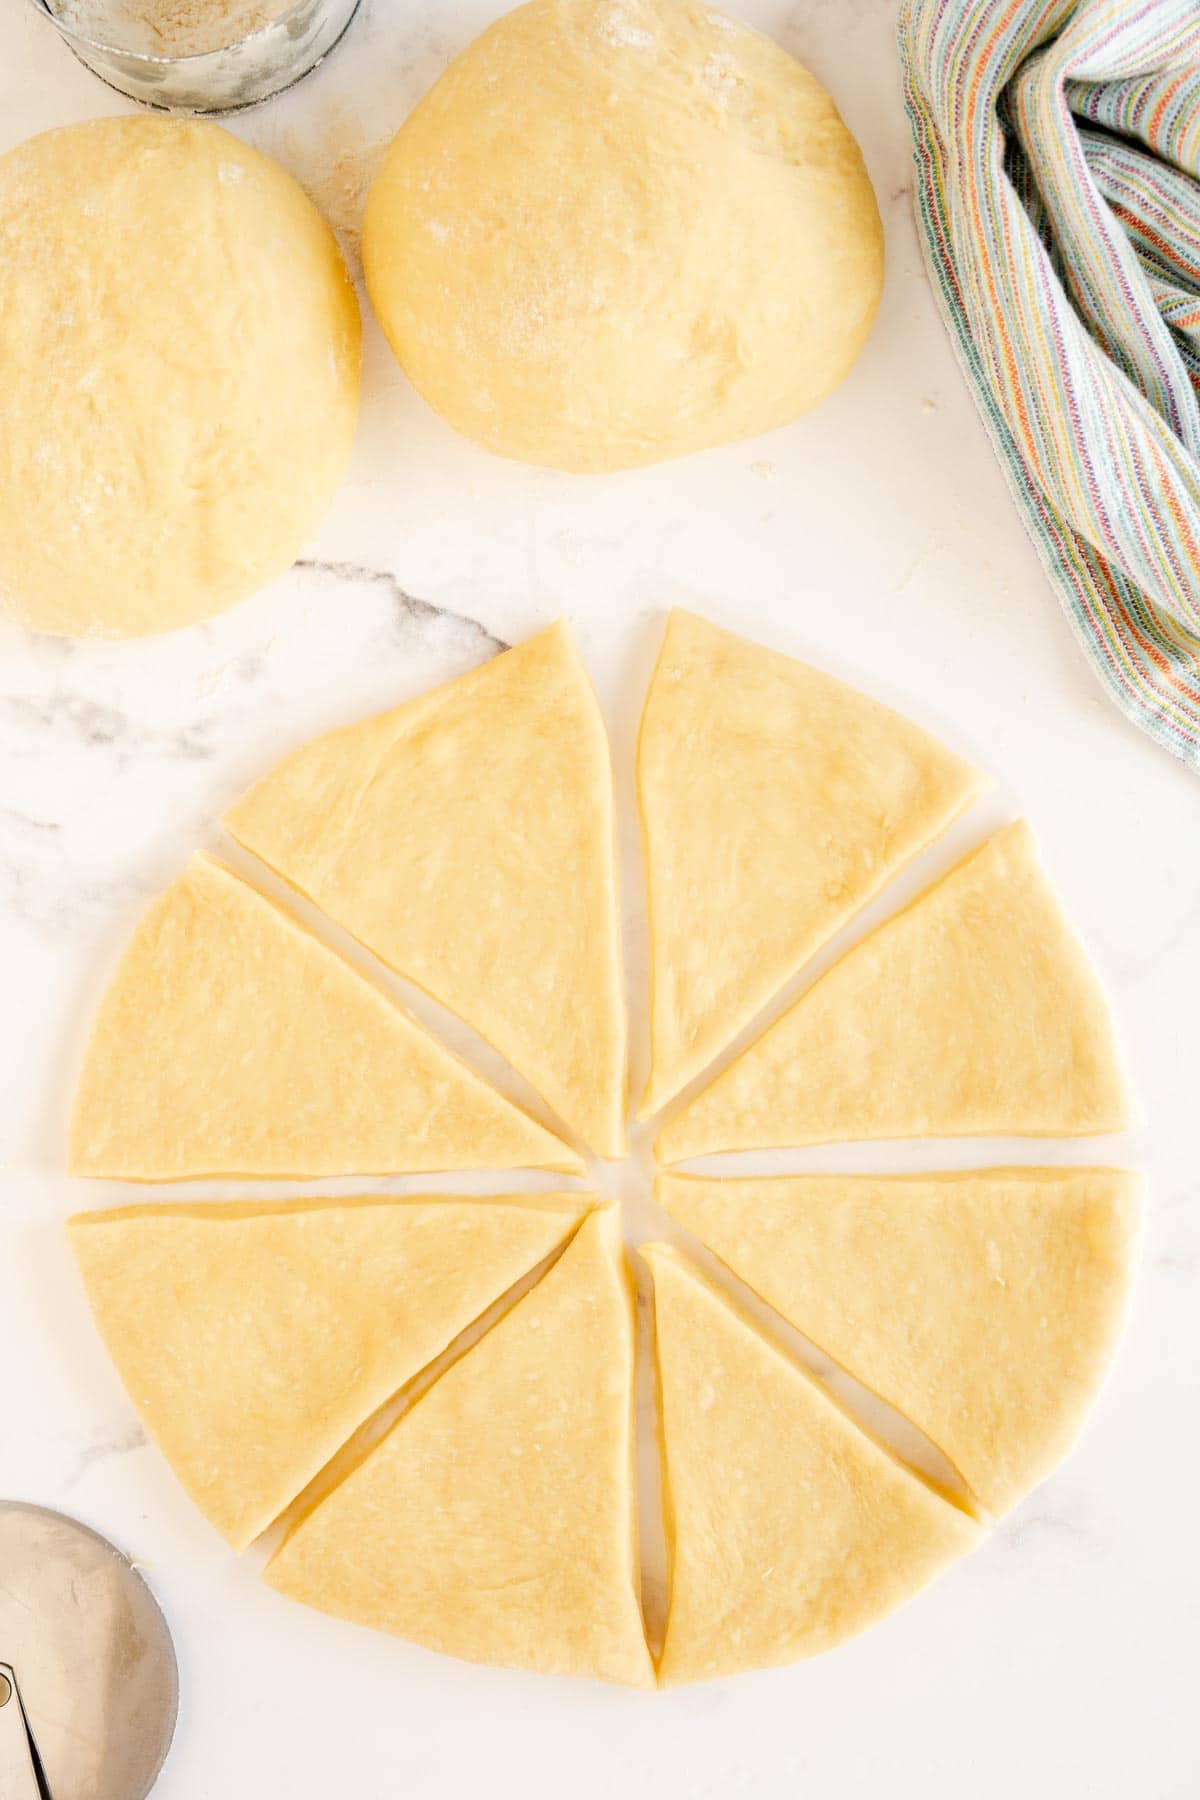 Crescent roll dough cut into eight wedges